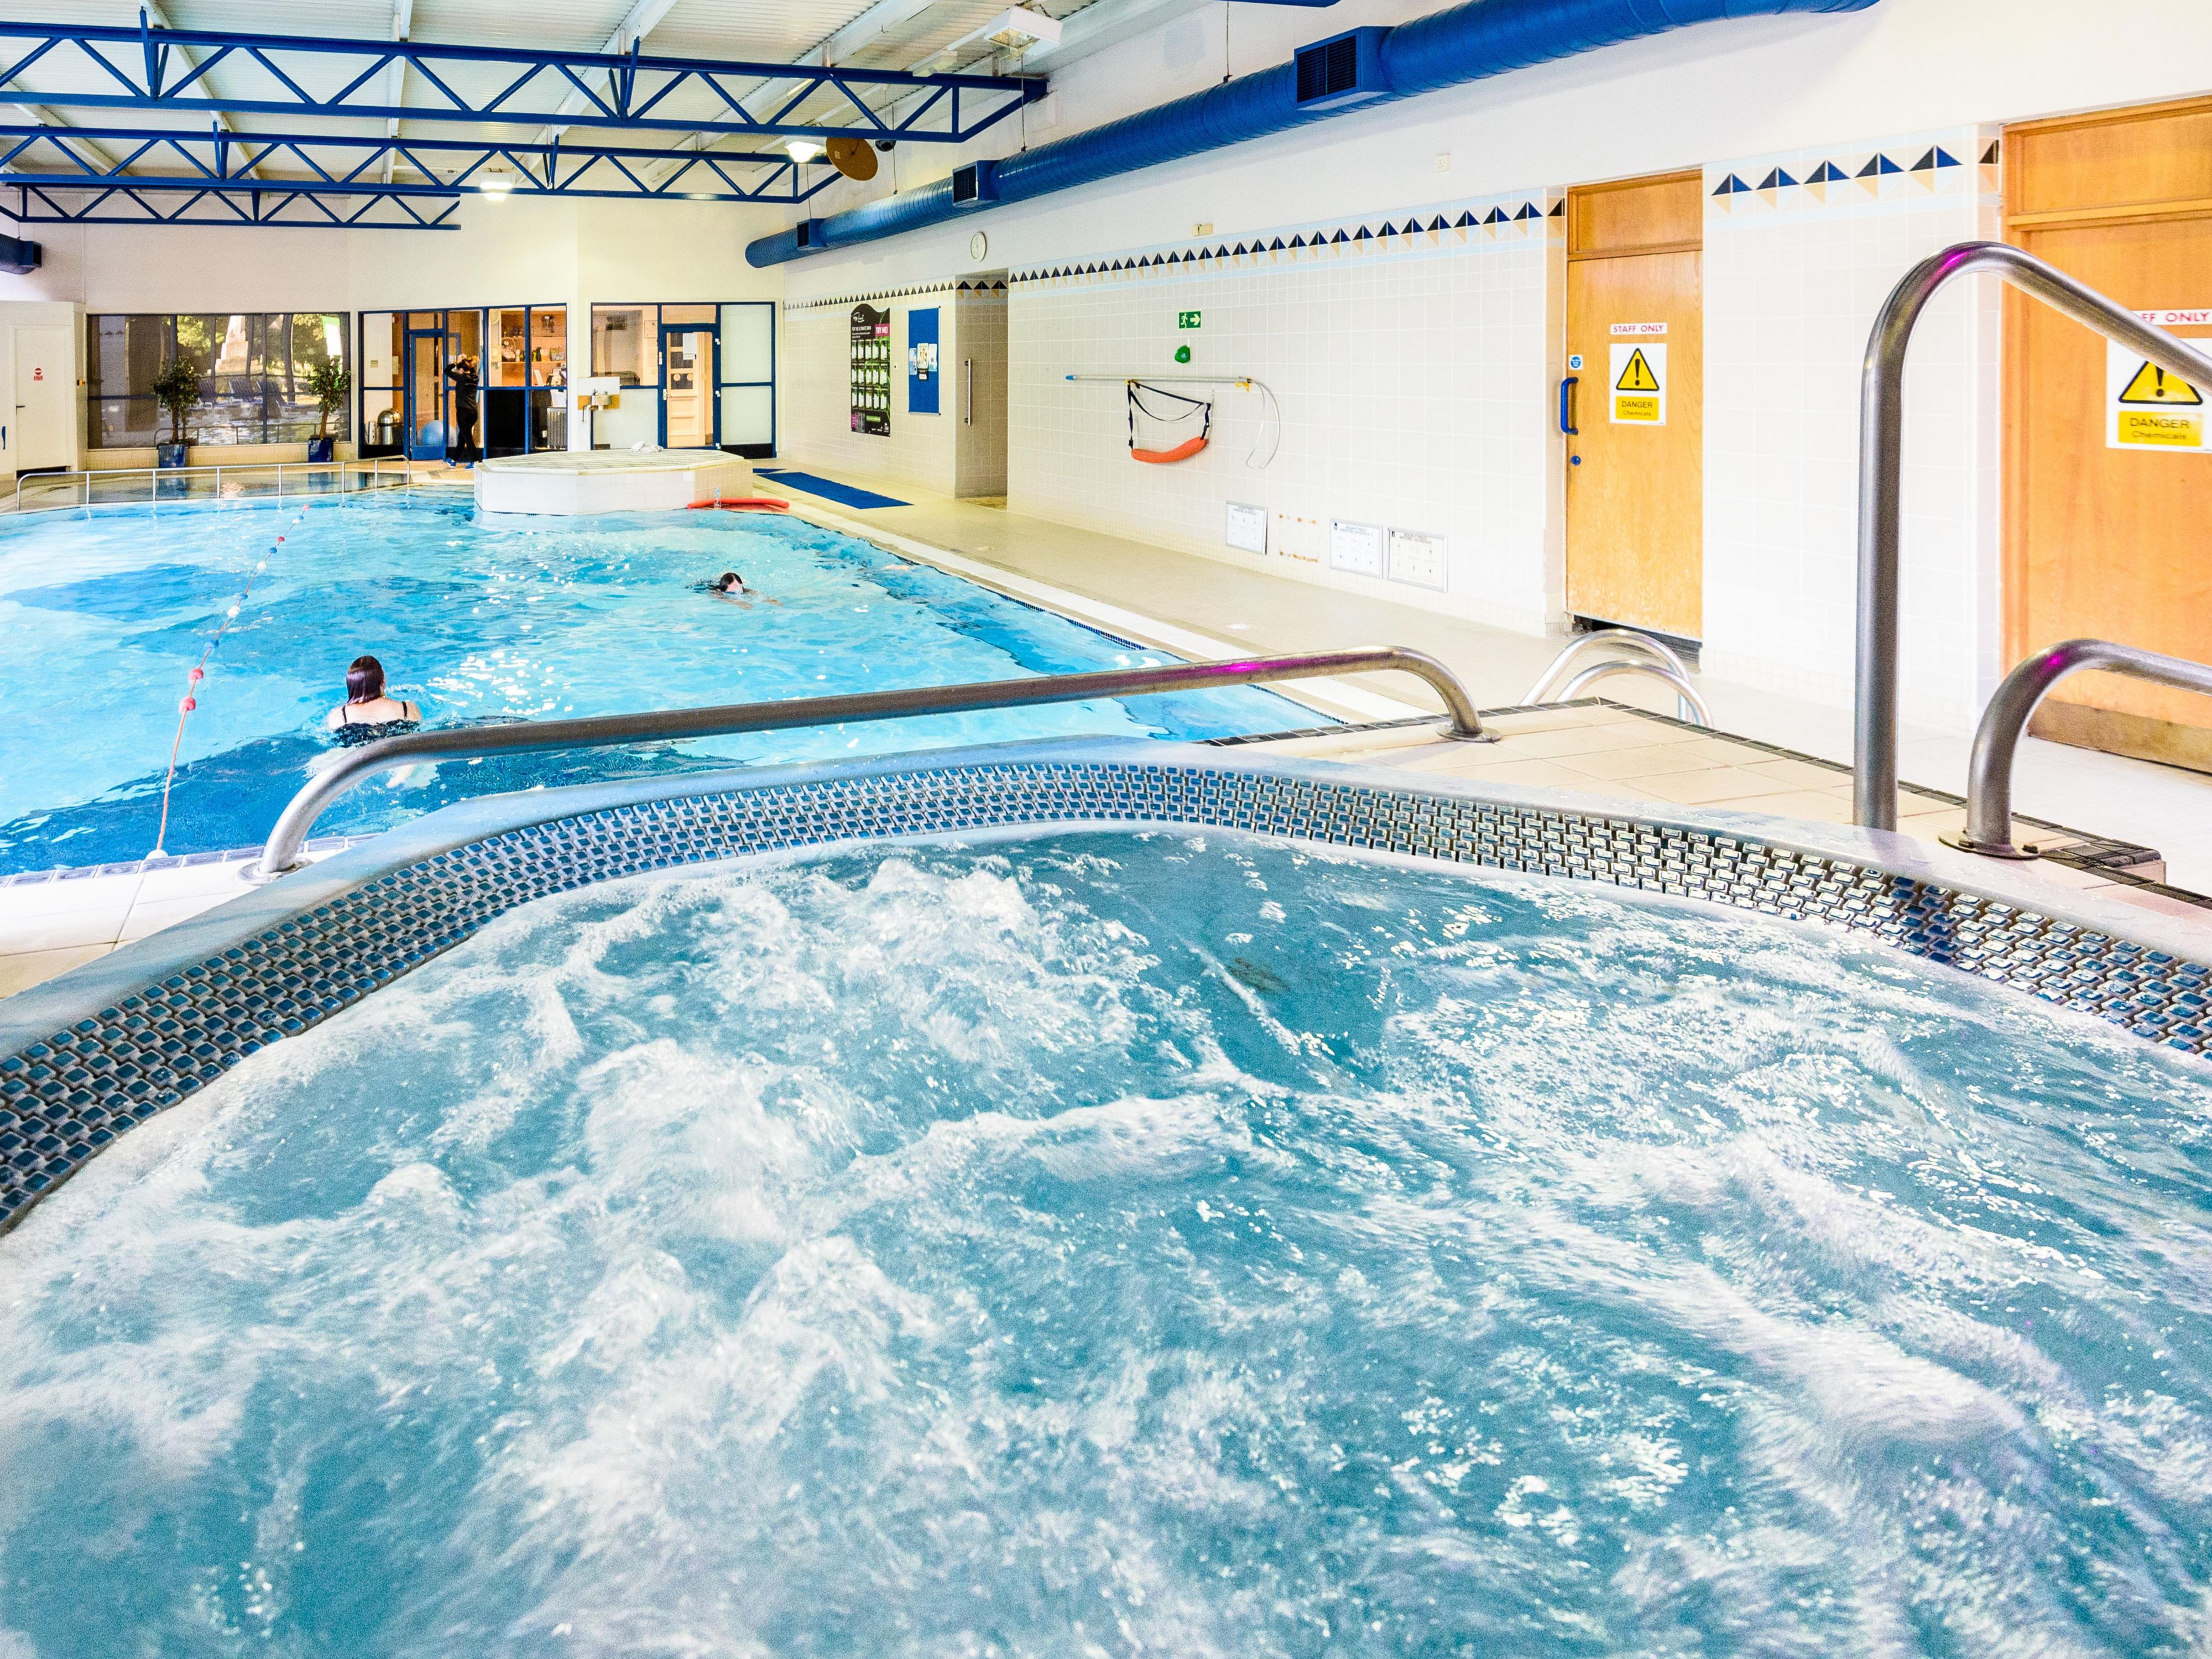 The You Fit Club offers you a wealth of options to get active and burn off some energy or to simply relax and unwind. The club features a large indoor heated swimming pool, a fully equipped gymnasium, a sauna, steam room and spa pool.